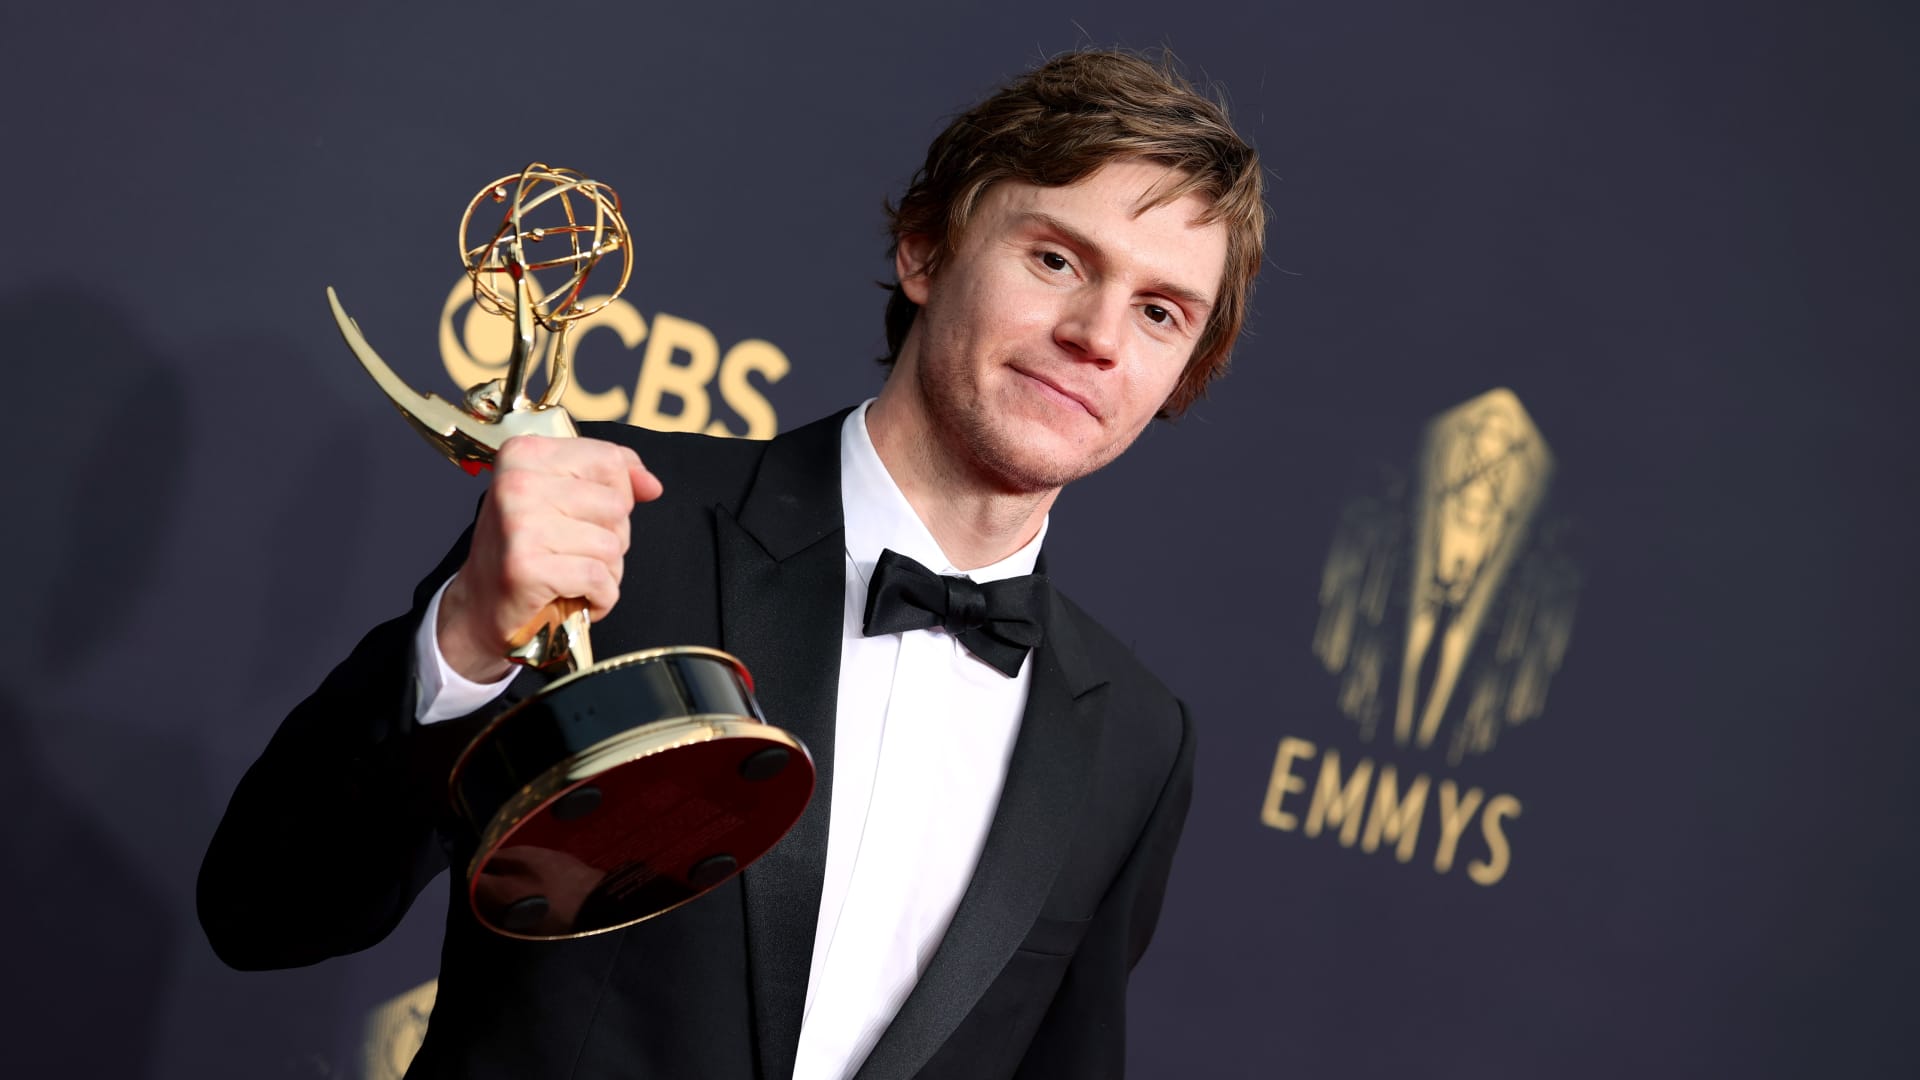 Evan Peters, winner of the Outstanding Supporting Actor In A Limited Or Anthology Series Or Movie award for ‘Mare Of Easttown,’ poses in the press room during the 73rd Primetime Emmy Awards at L.A. LIVE on September 19, 2021 in Los Angeles, California.